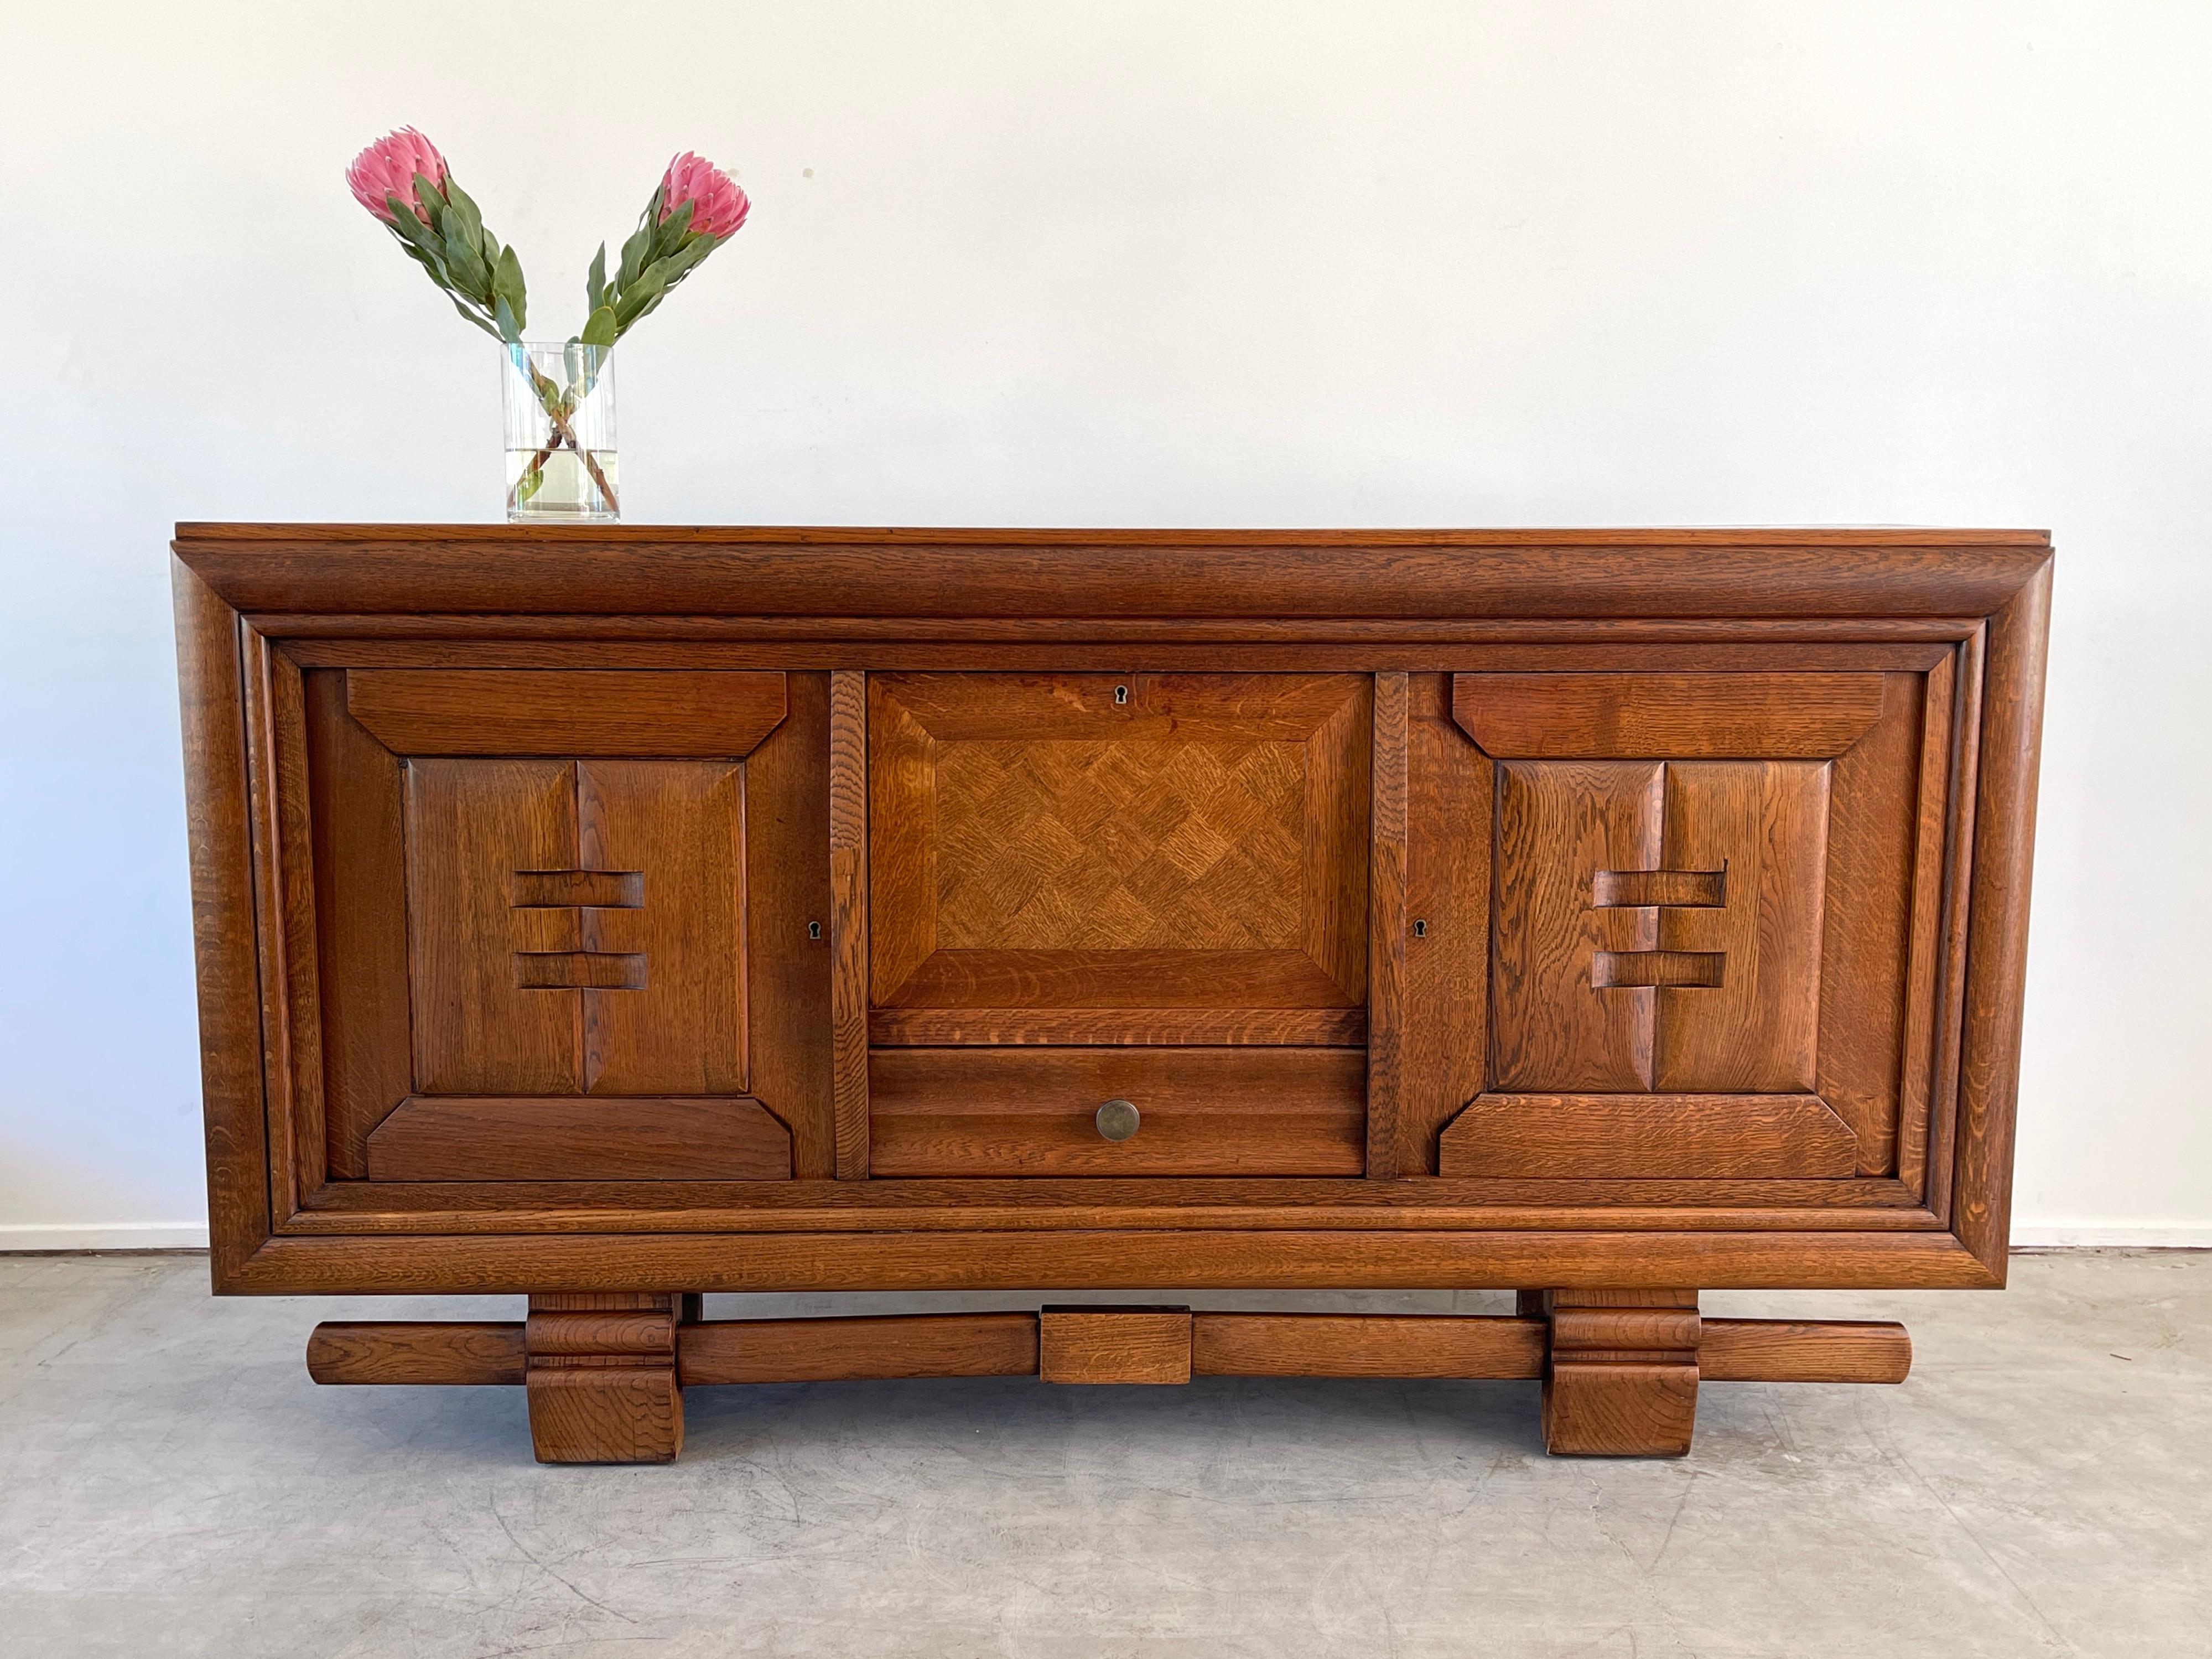 Beautiful 1940's French sideboard in the style of Charles Dudouyt
Beautiful parquetry top and floating base 
Key opens 2 doors to reveal open shelving and center drop down door to reveal glass mirrored shelf and lower drawer 
Incredible